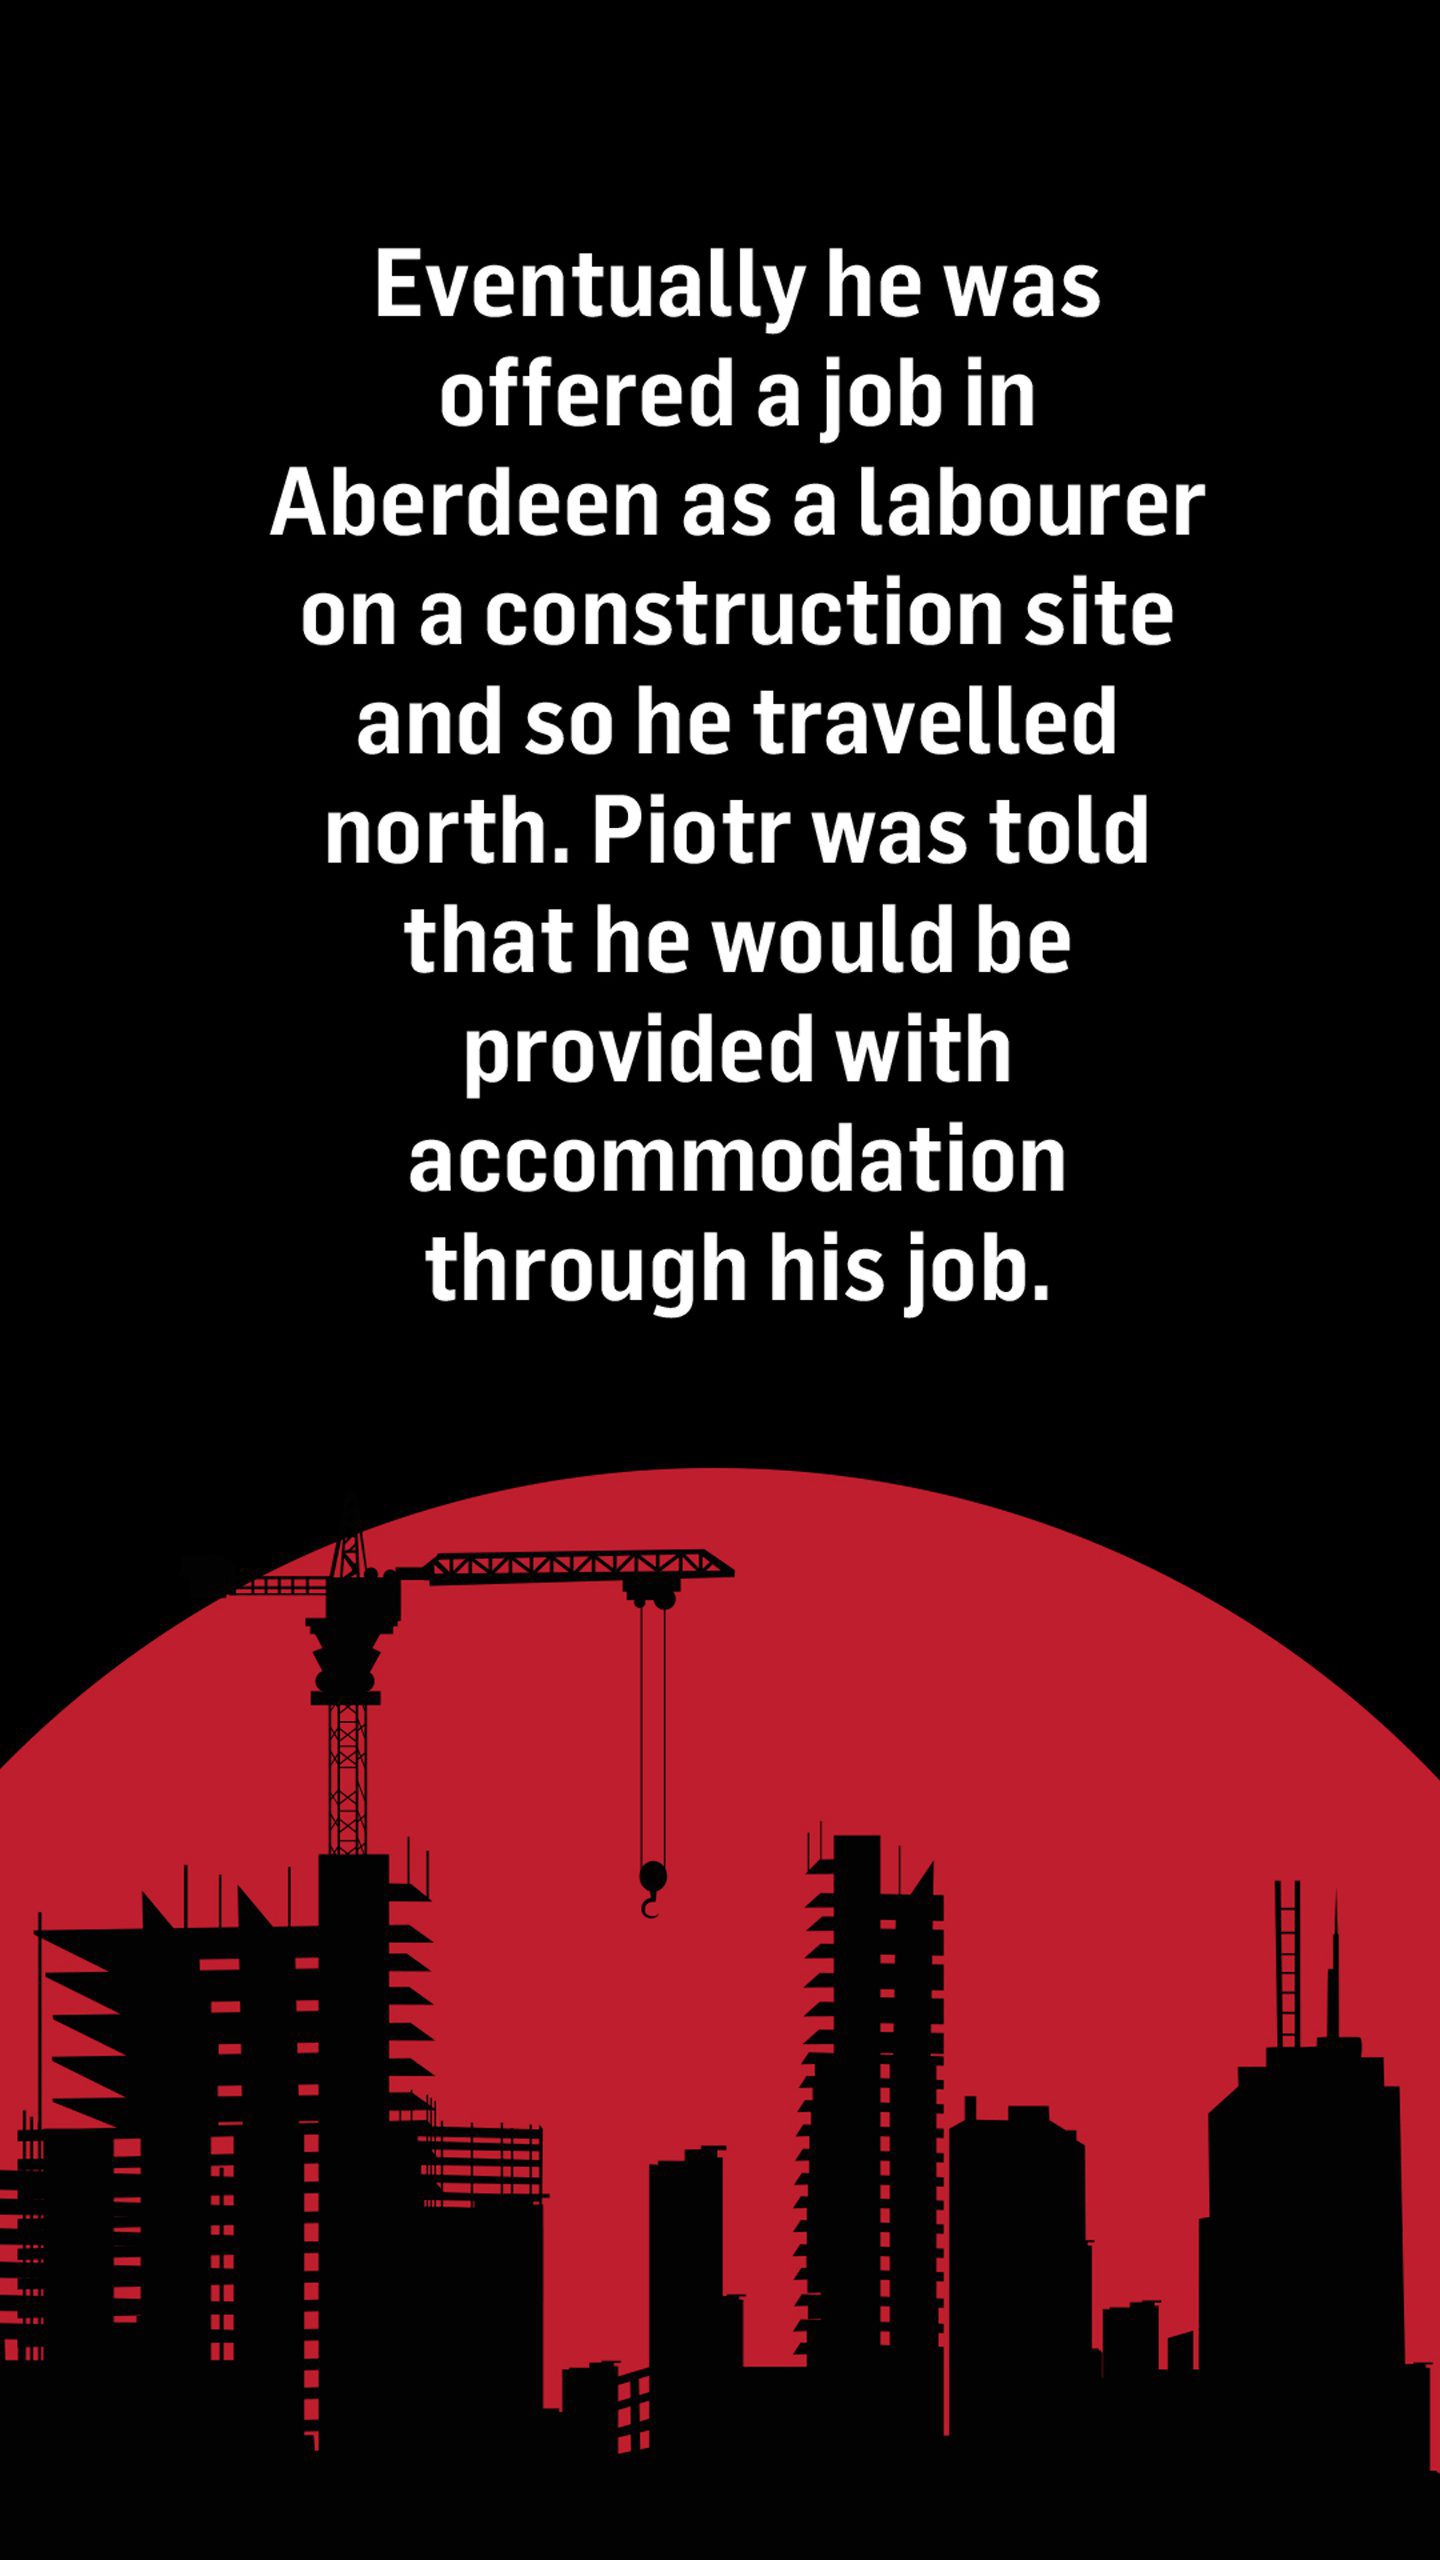 A black silhouette of a construction site with a crane. Text reads: Eventually he was offered a job in Aberdeen as a labourer on a construction site and so he travelled north. Piotr was told that he would be provided with accommodation through his job.